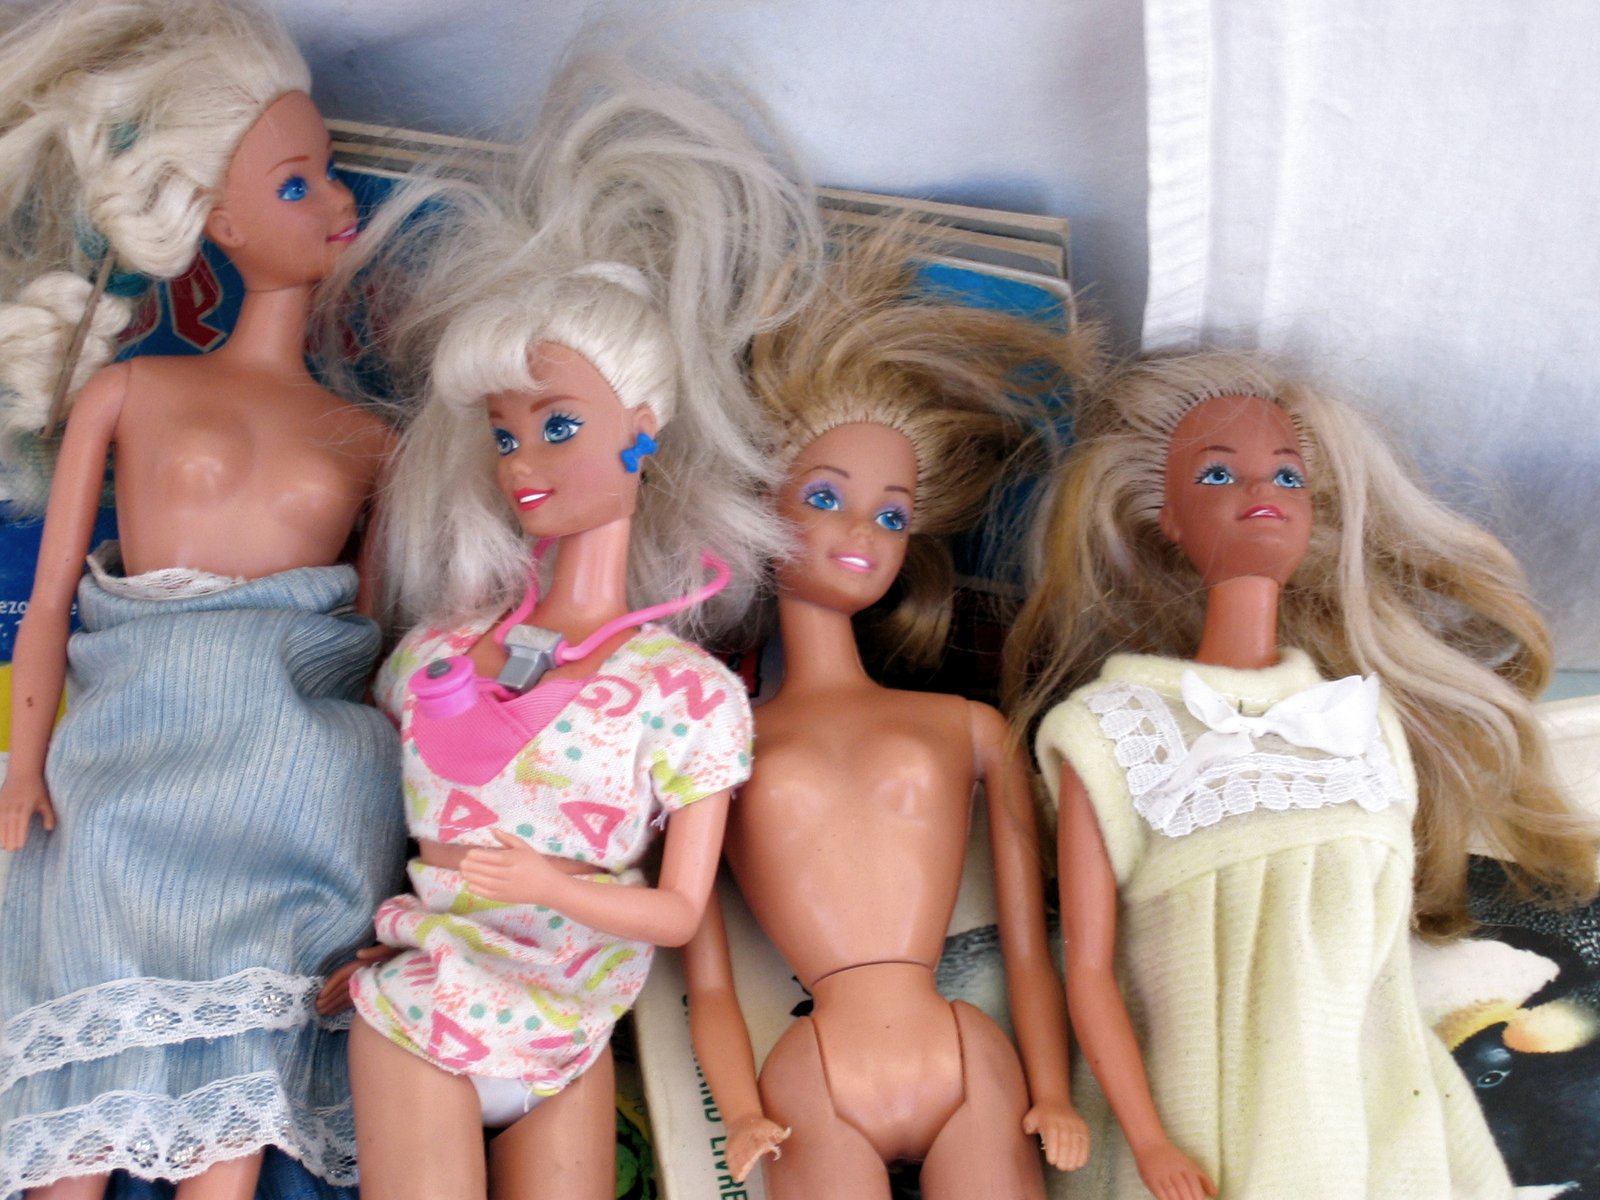 four dolls are on a bed and one is wearing pajamas